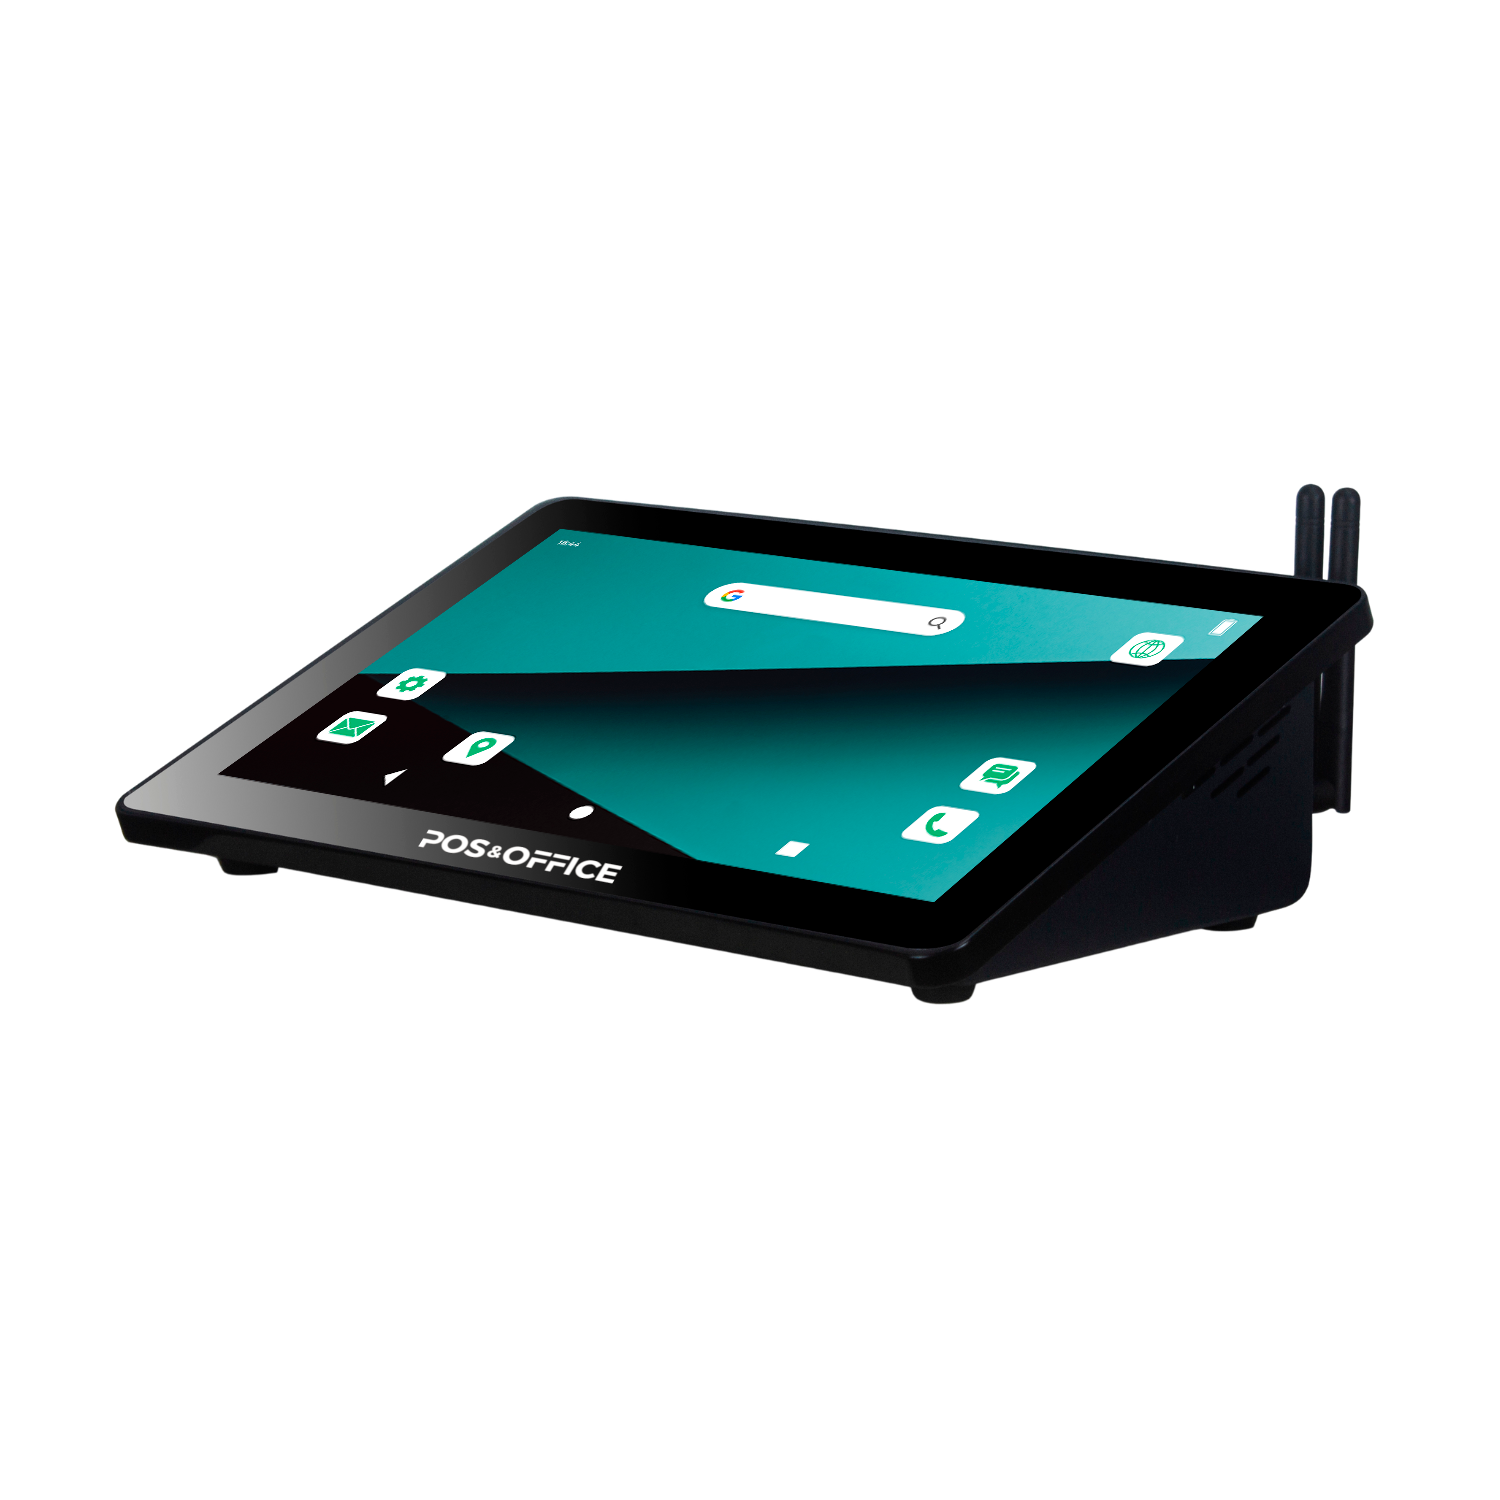 AI100, Android, Windows, all in one, all in one terminal, android POS, Windows POS, terminal de punto de venta, automação comercial, AIO, POS, PDV, all in one terminal, terminal de ponto de venda